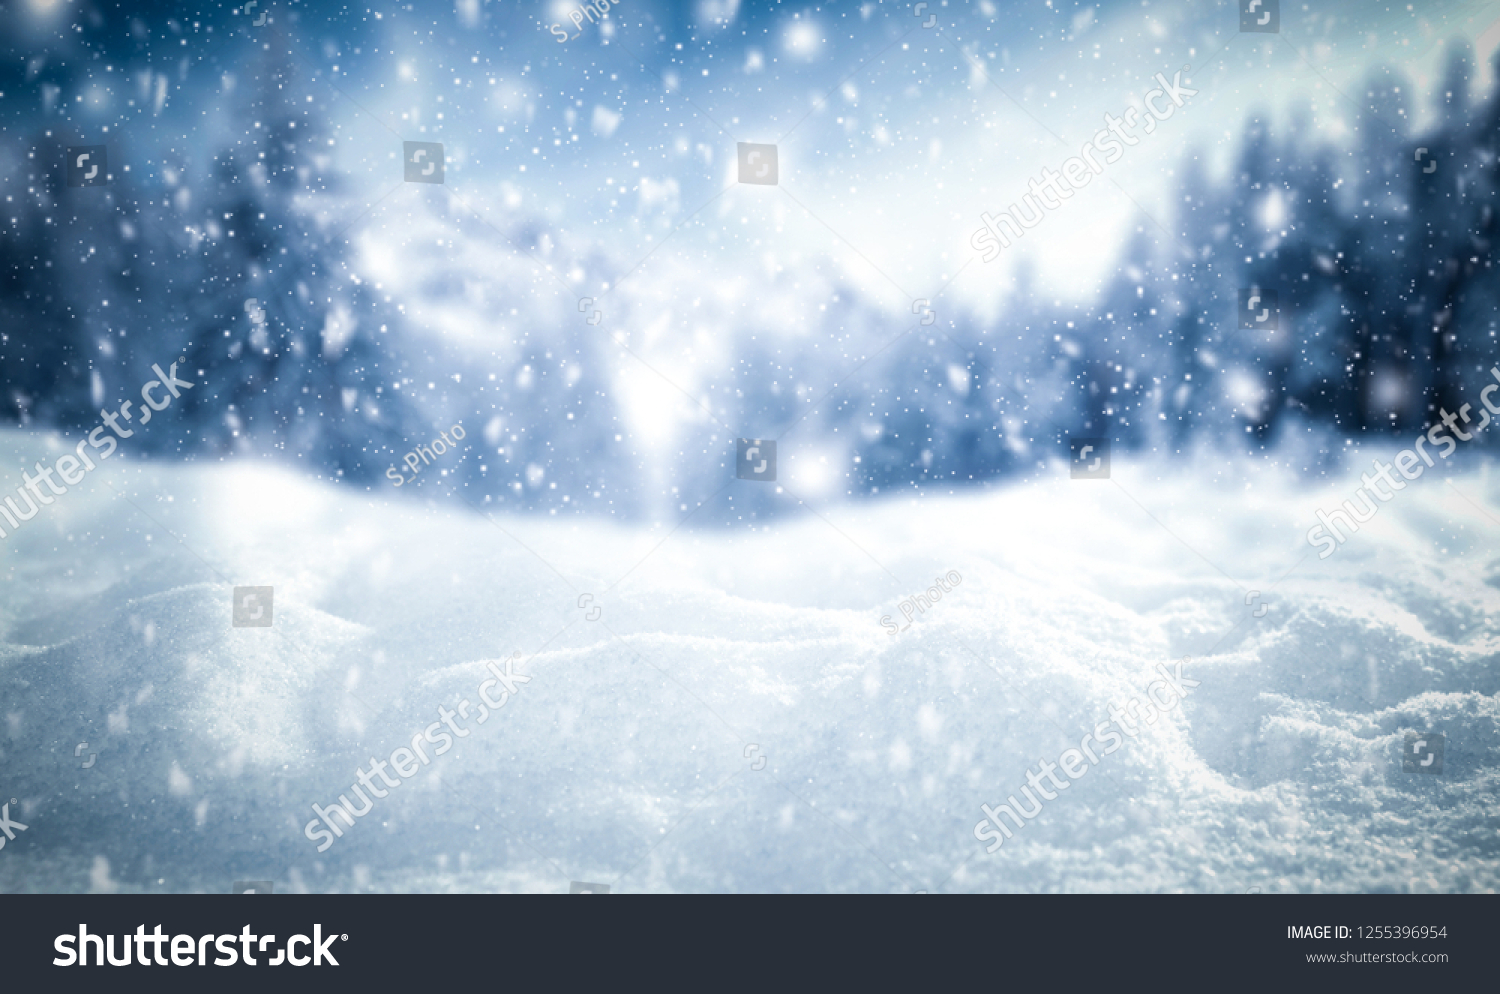 Winter background of snow and frost with free space for your decoration  #1255396954